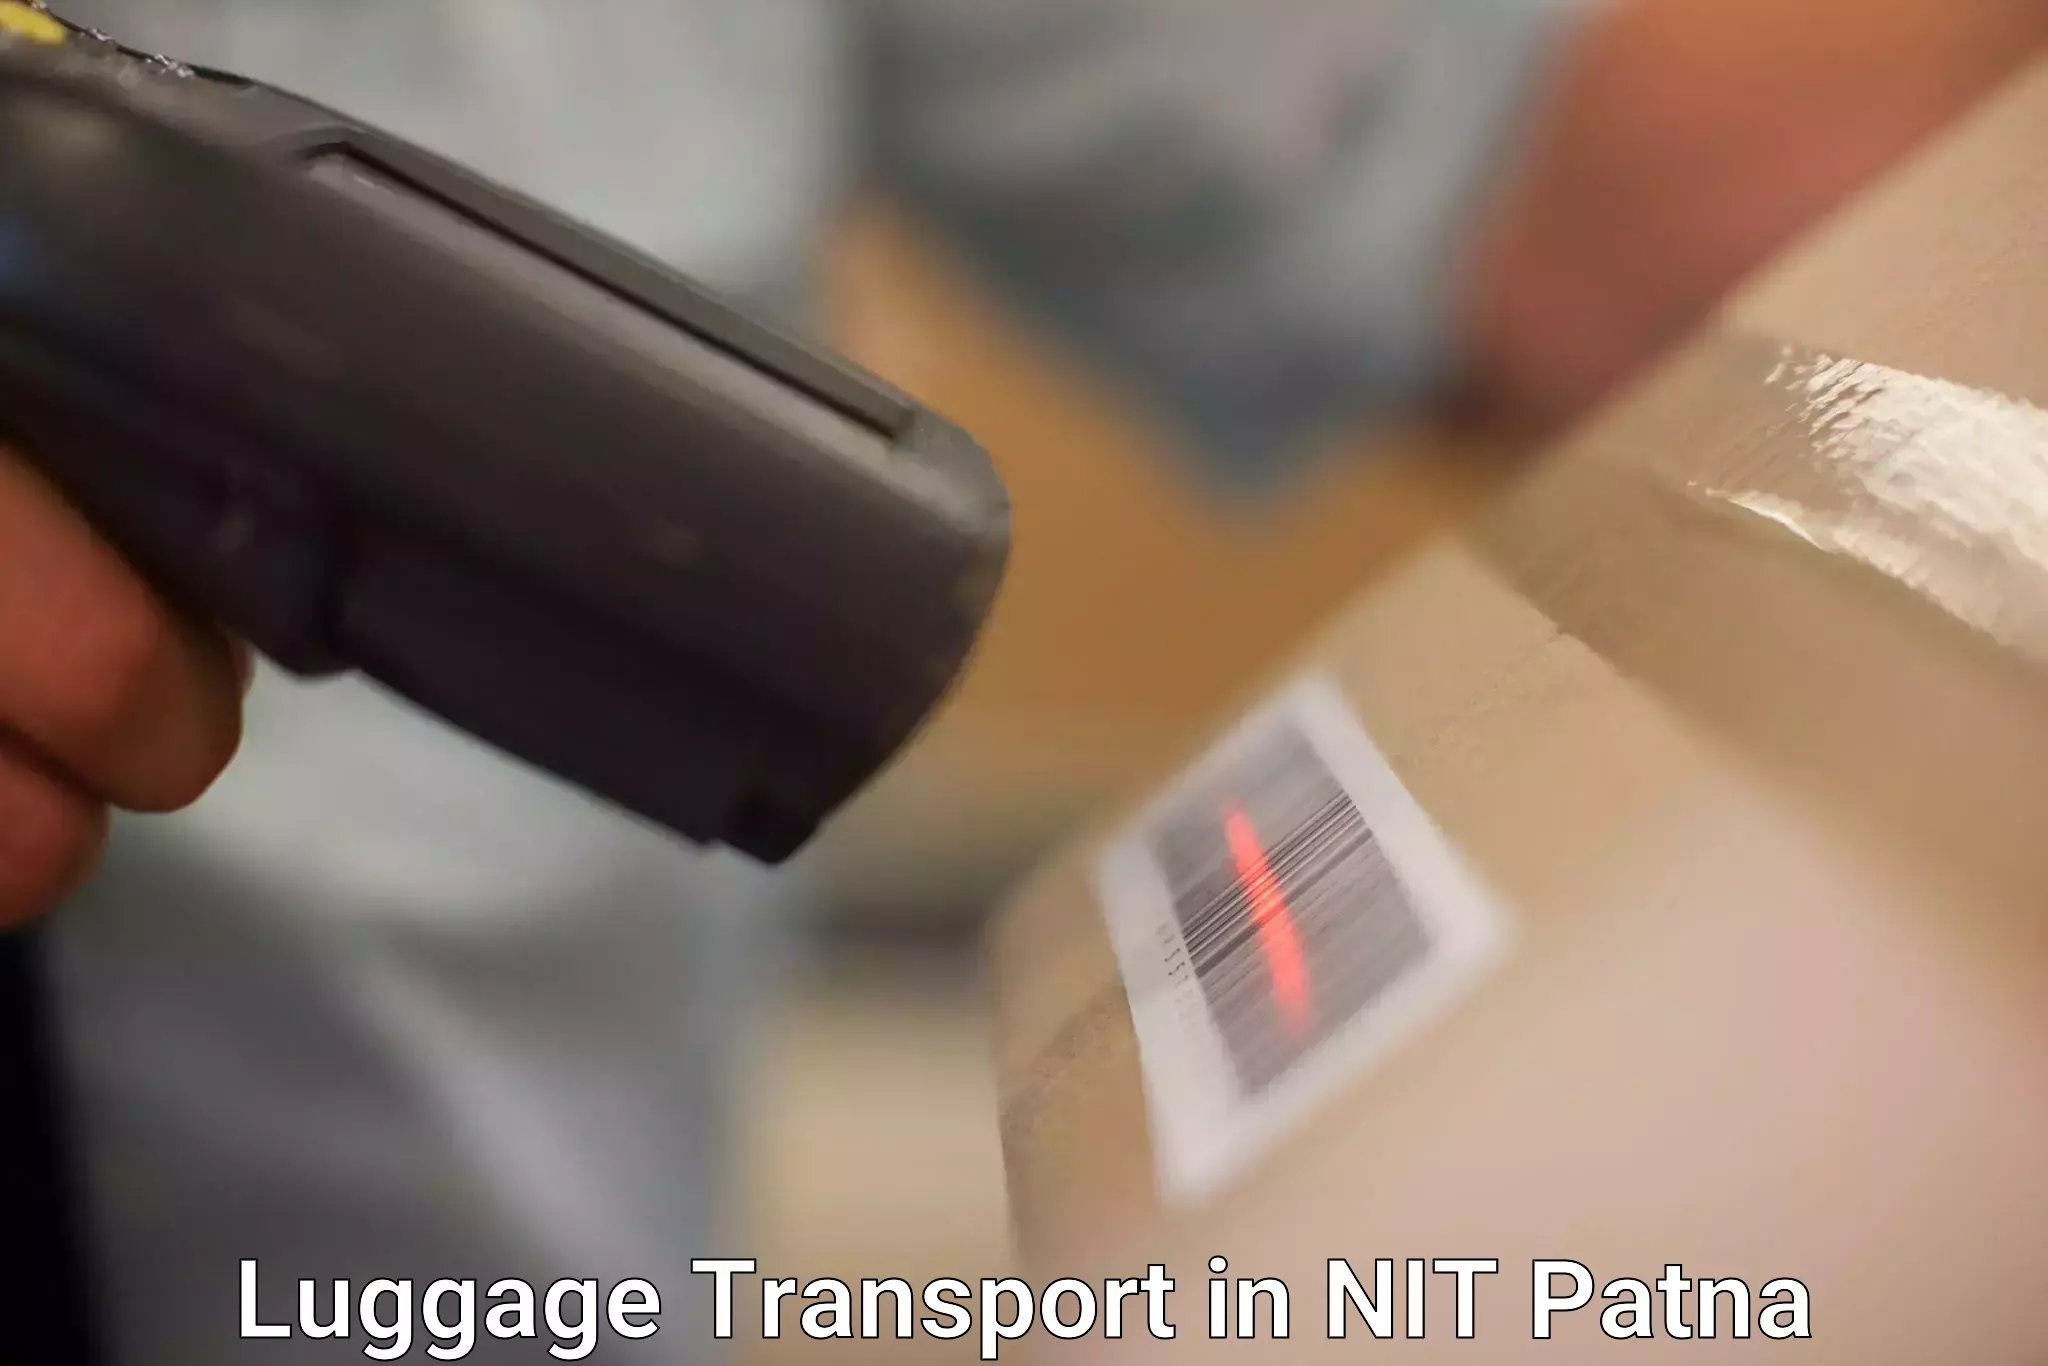 Nationwide luggage transport in NIT Patna